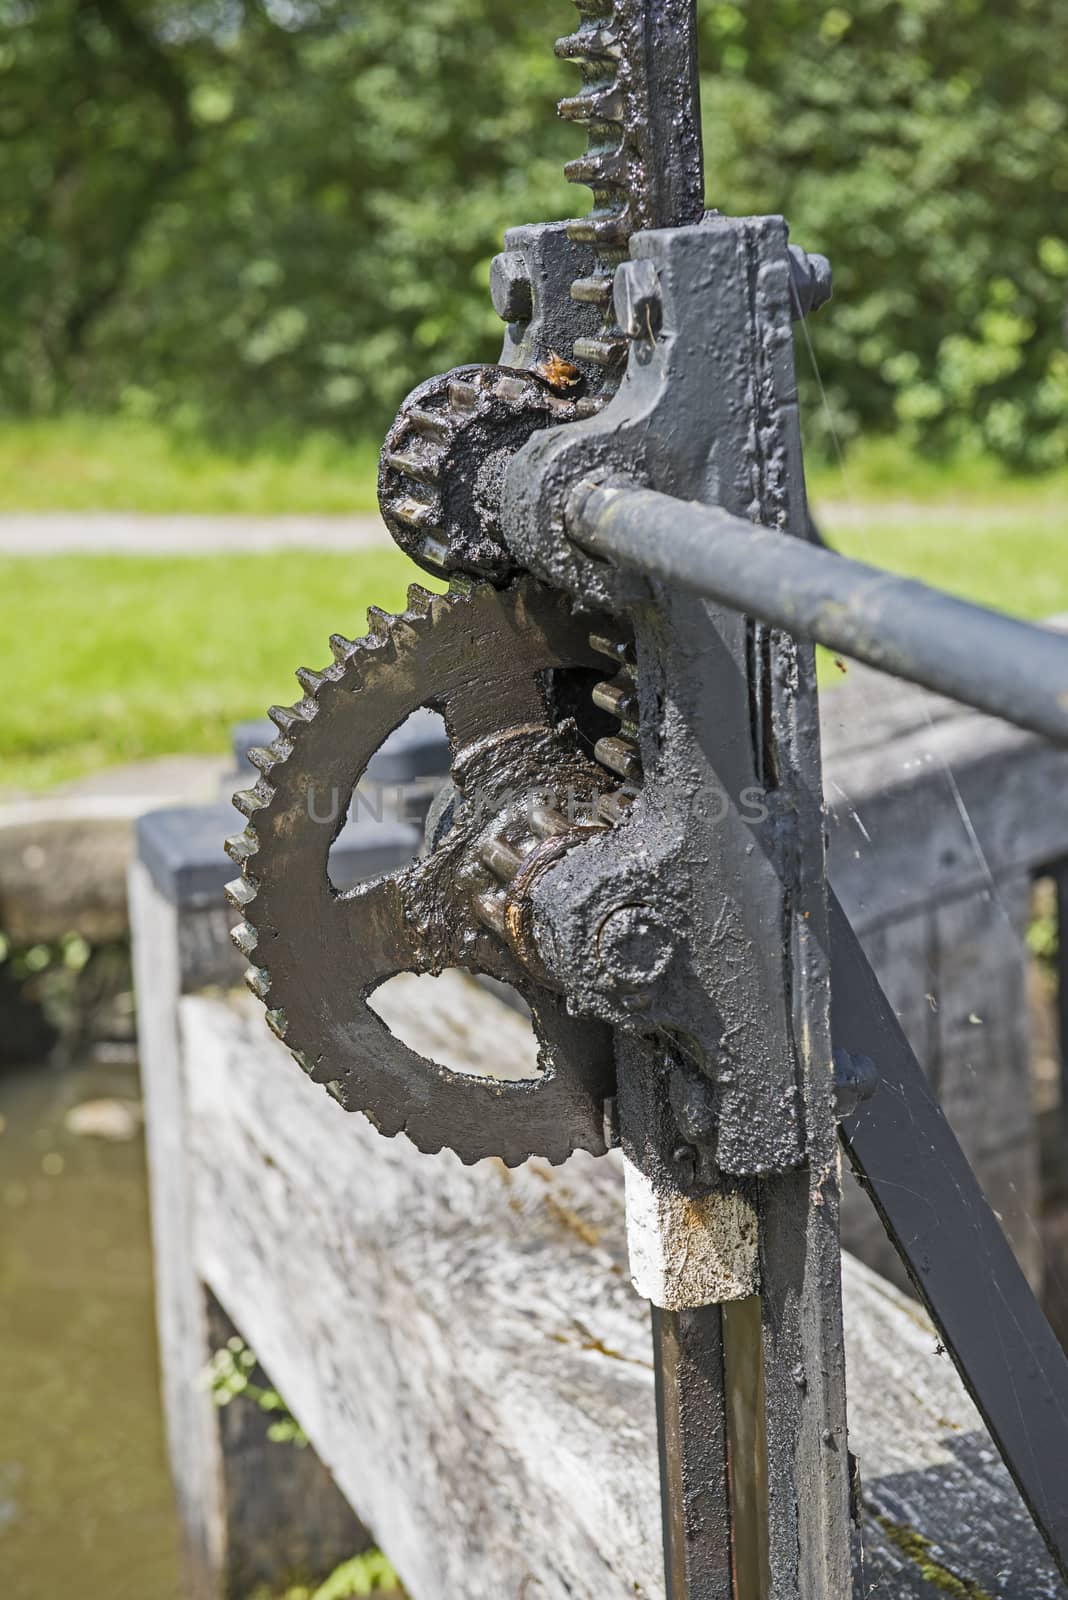 Closeup detail of old winding gear cog wheel on canal lock gate in rural setting